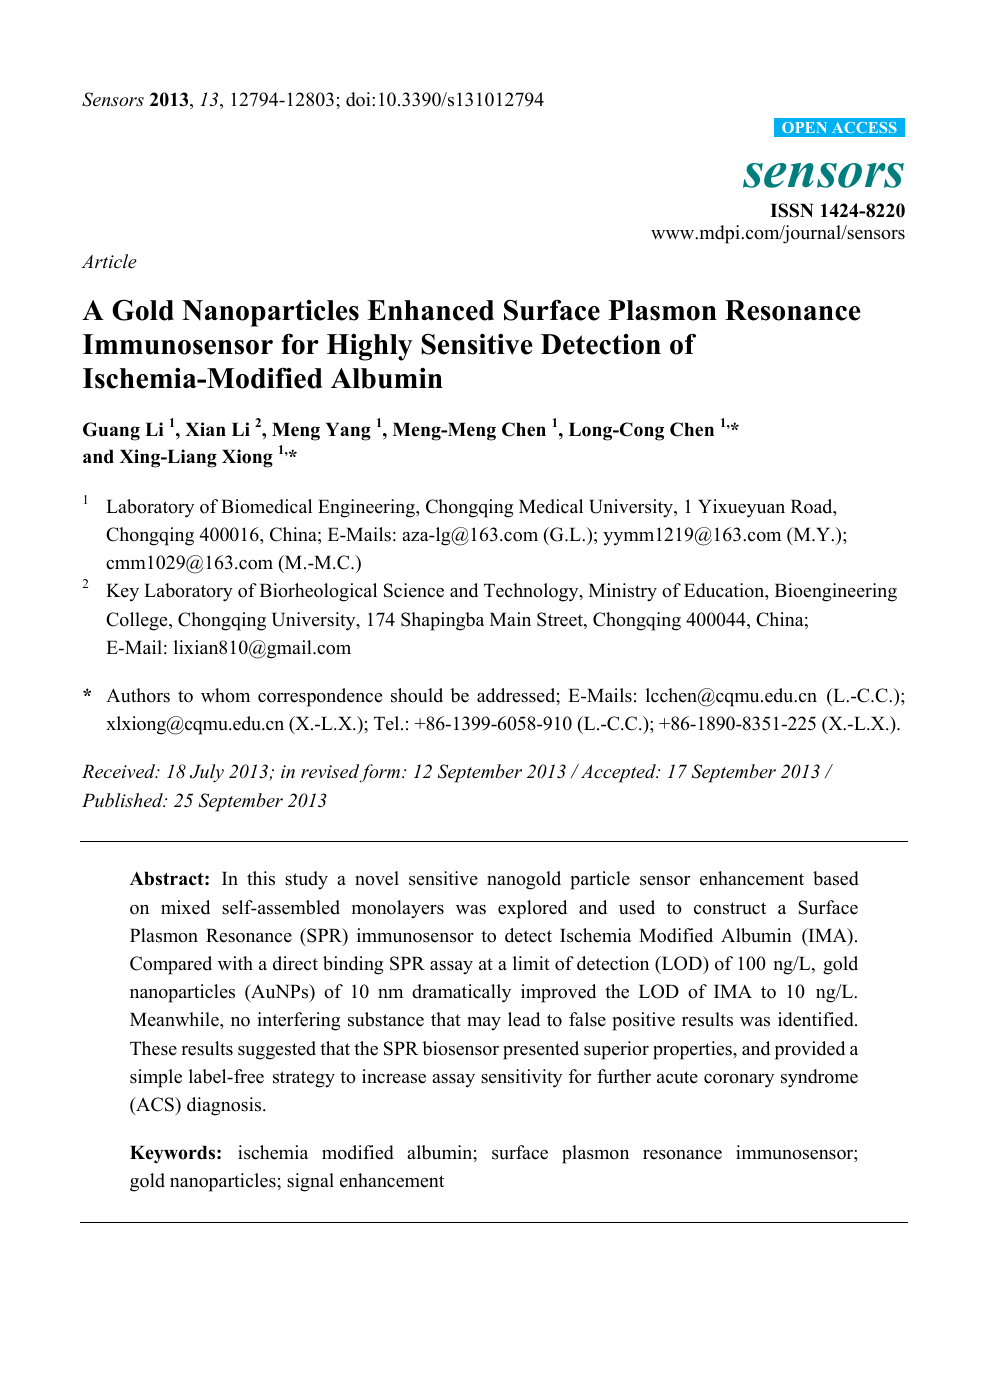 A Gold Nanoparticles Enhanced Surface Plasmon Resonance Immunosensor For Highly Sensitive Detection Of Ischemia Modified Albumin Topic Of Research Paper In Nano Technology Download Scholarly Article Pdf And Read For Free On Cyberleninka